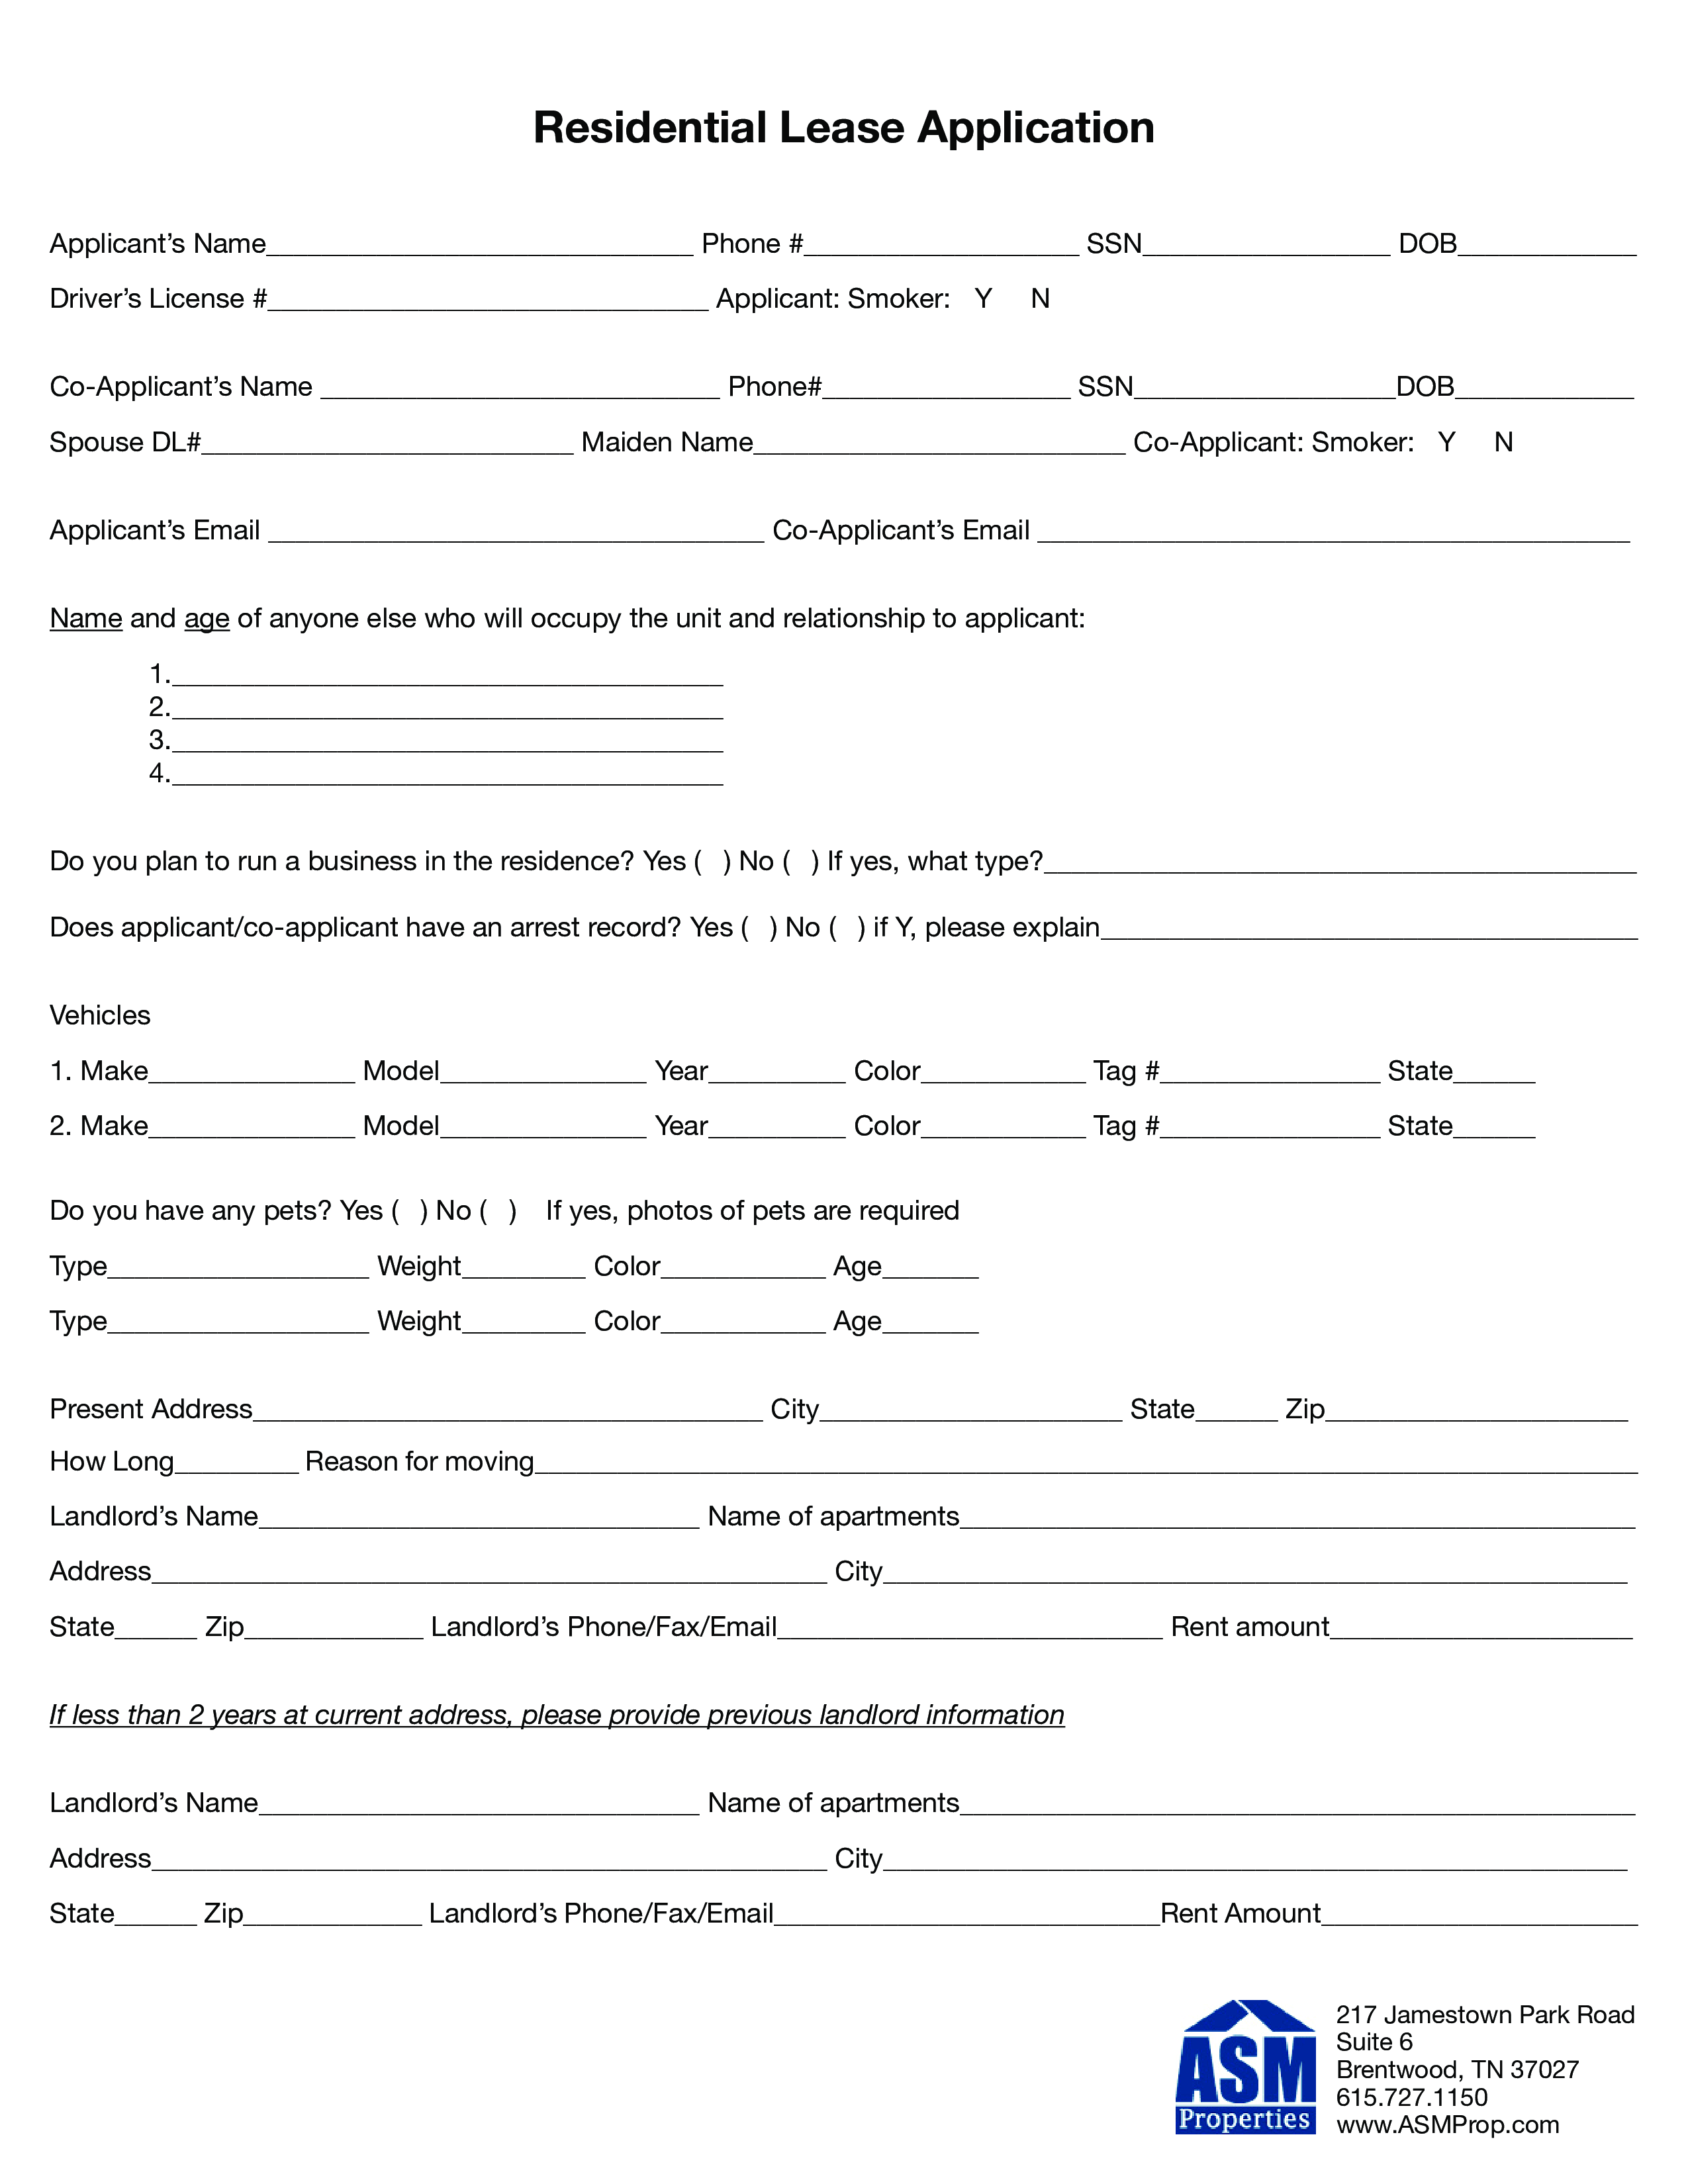 residential lease application form example template